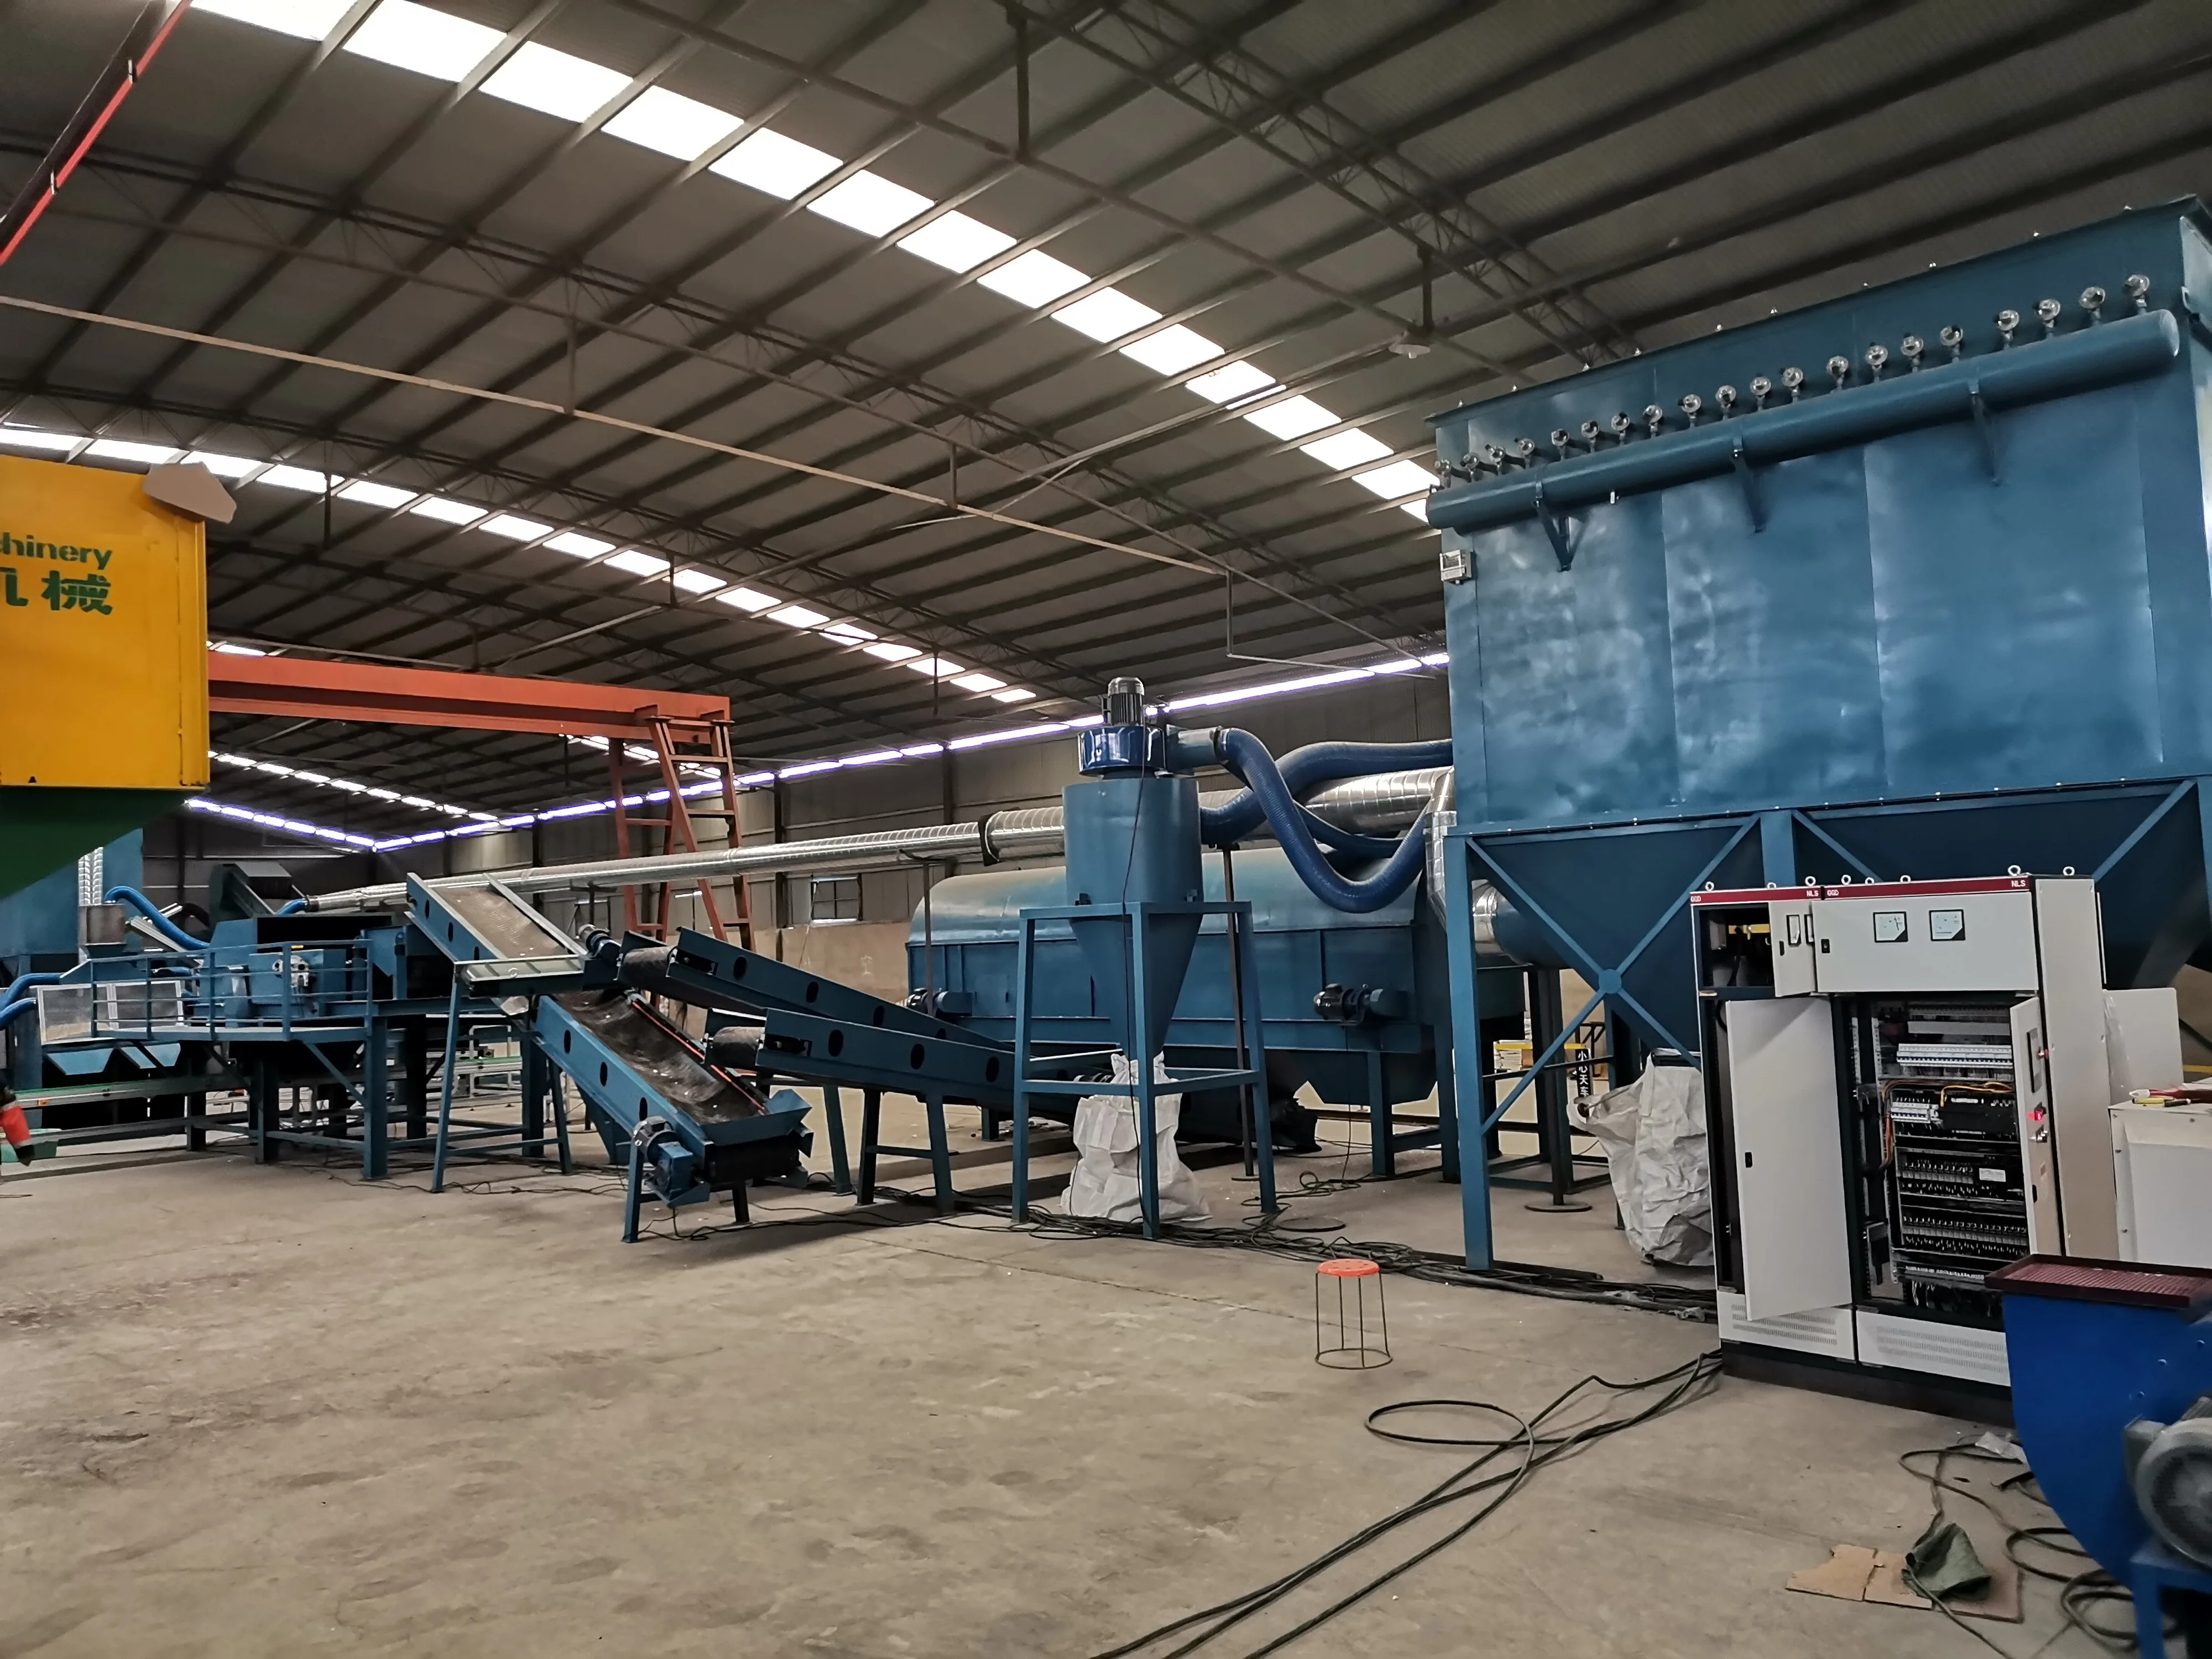 Construction solid waste recovery management machine/production line